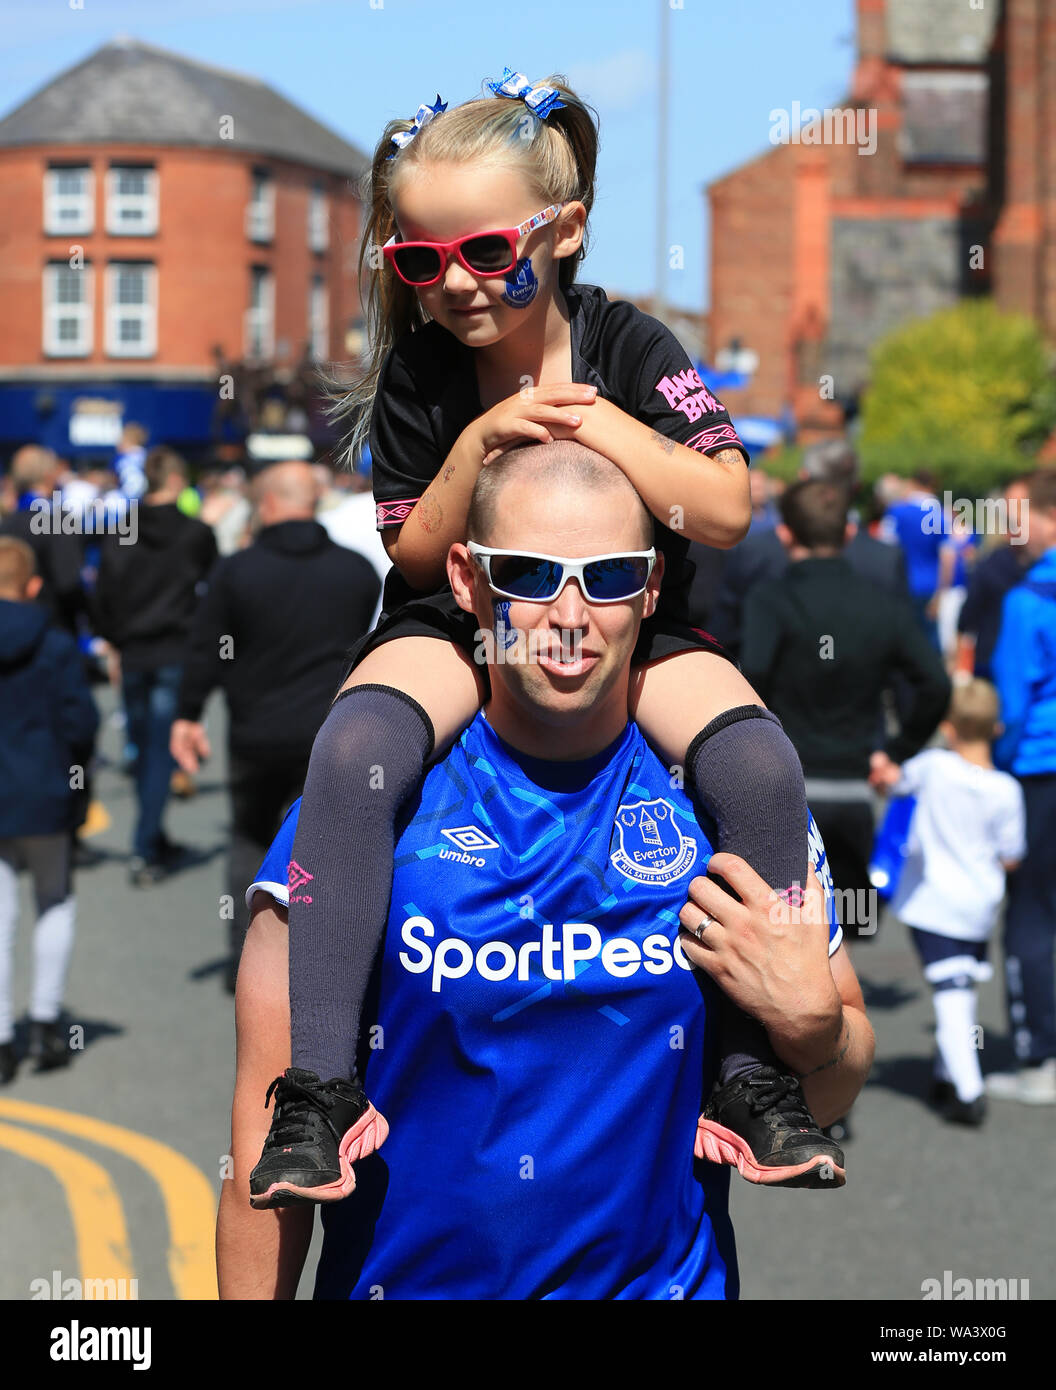 Liverpool, Lancashire, UK. 17th Aug, 2019.  Premier League Football, Everton versus Watford; a young Evertonian with her face painted in club colours rides on her father's shoulders in Goodison Road prior to the match - Editorial Use Only. No use with unauthorized audio, video, data, fixture lists, club/league logos or 'live' services. Online in-match use limited to 120 images, no video emulation. Credit: Action Plus Sports Images/Alamy Live News Stock Photo